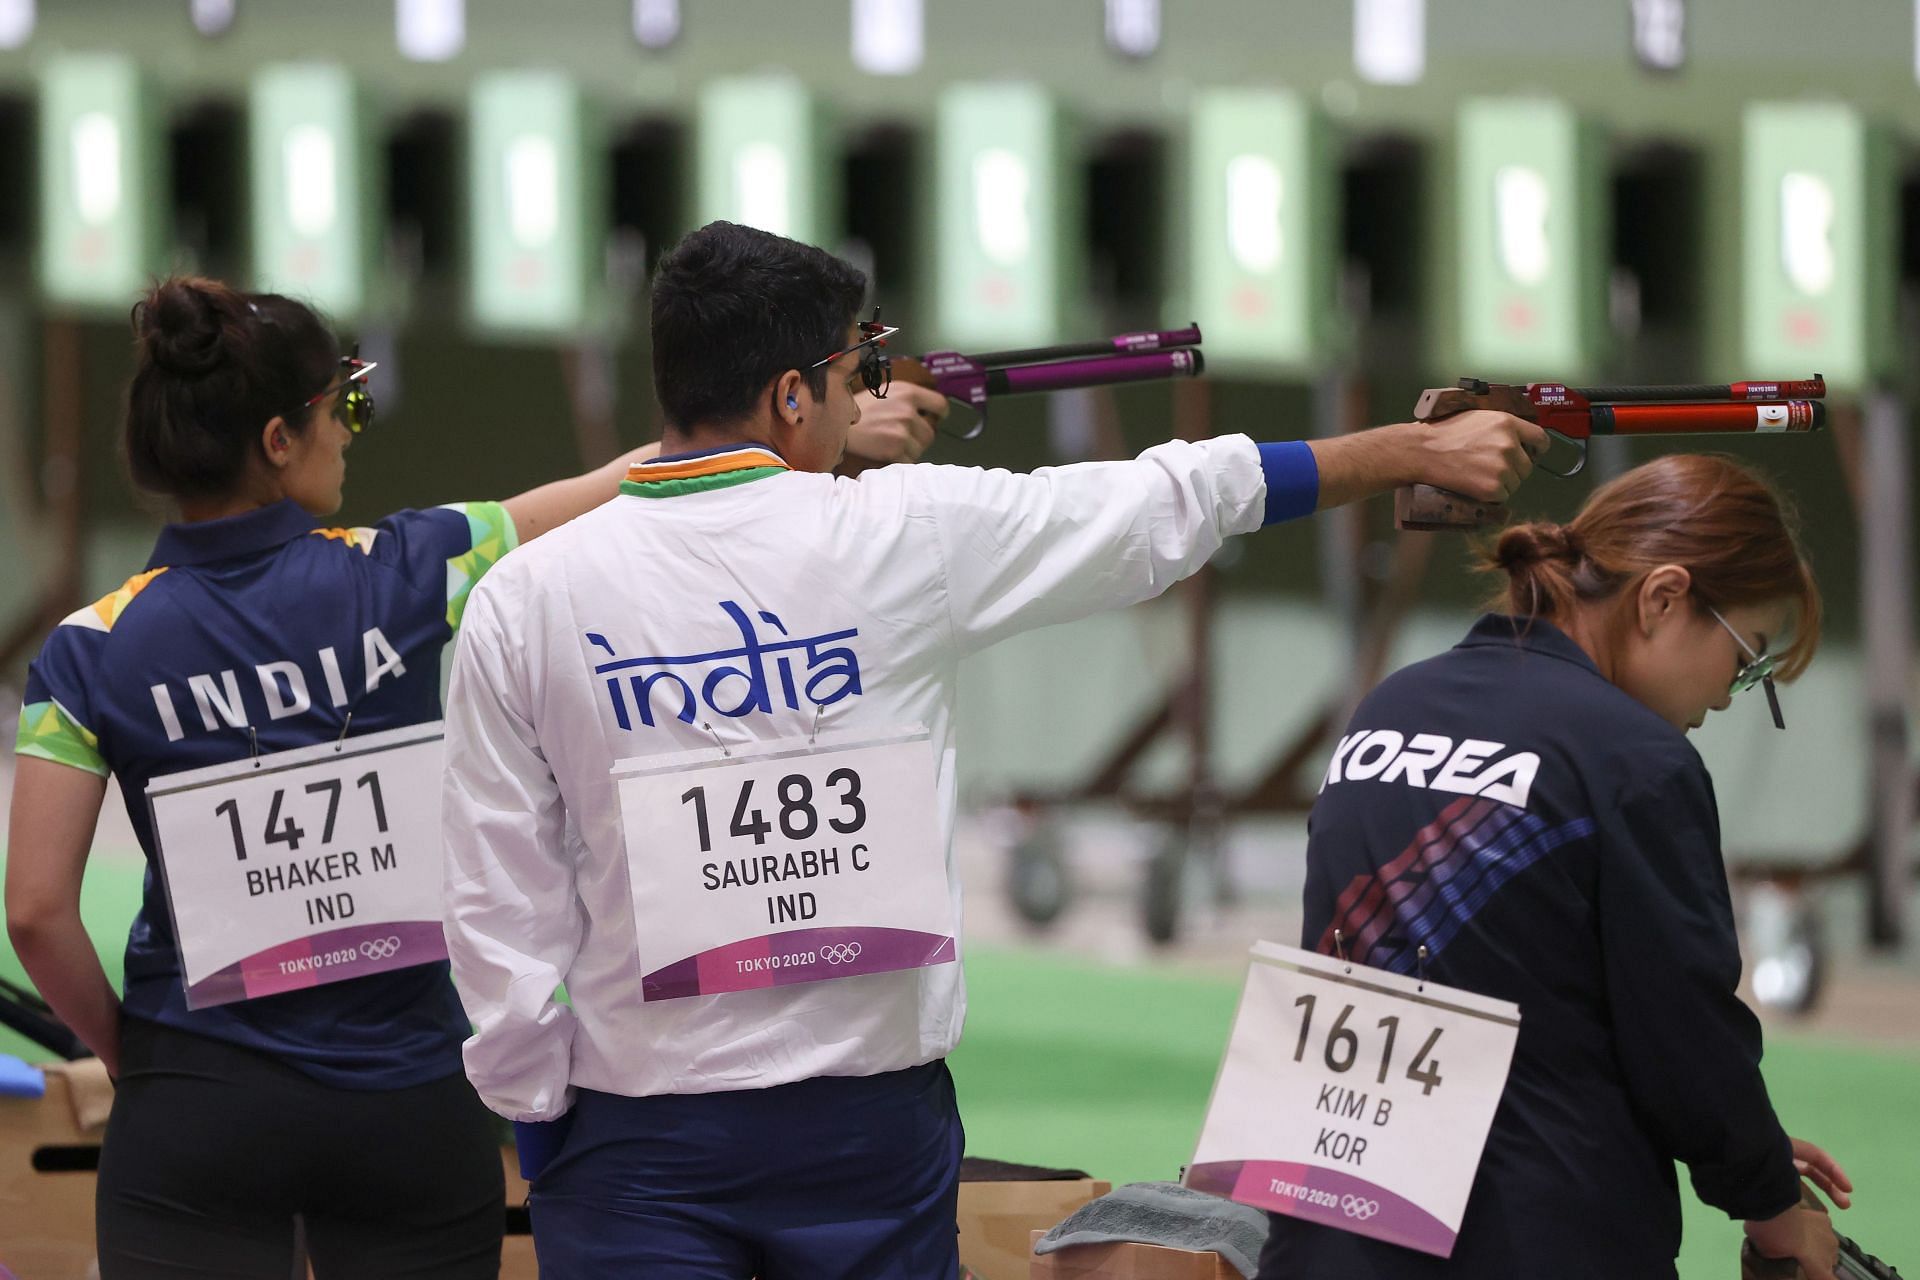 Shooting - Olympics: Indian shooting team in action